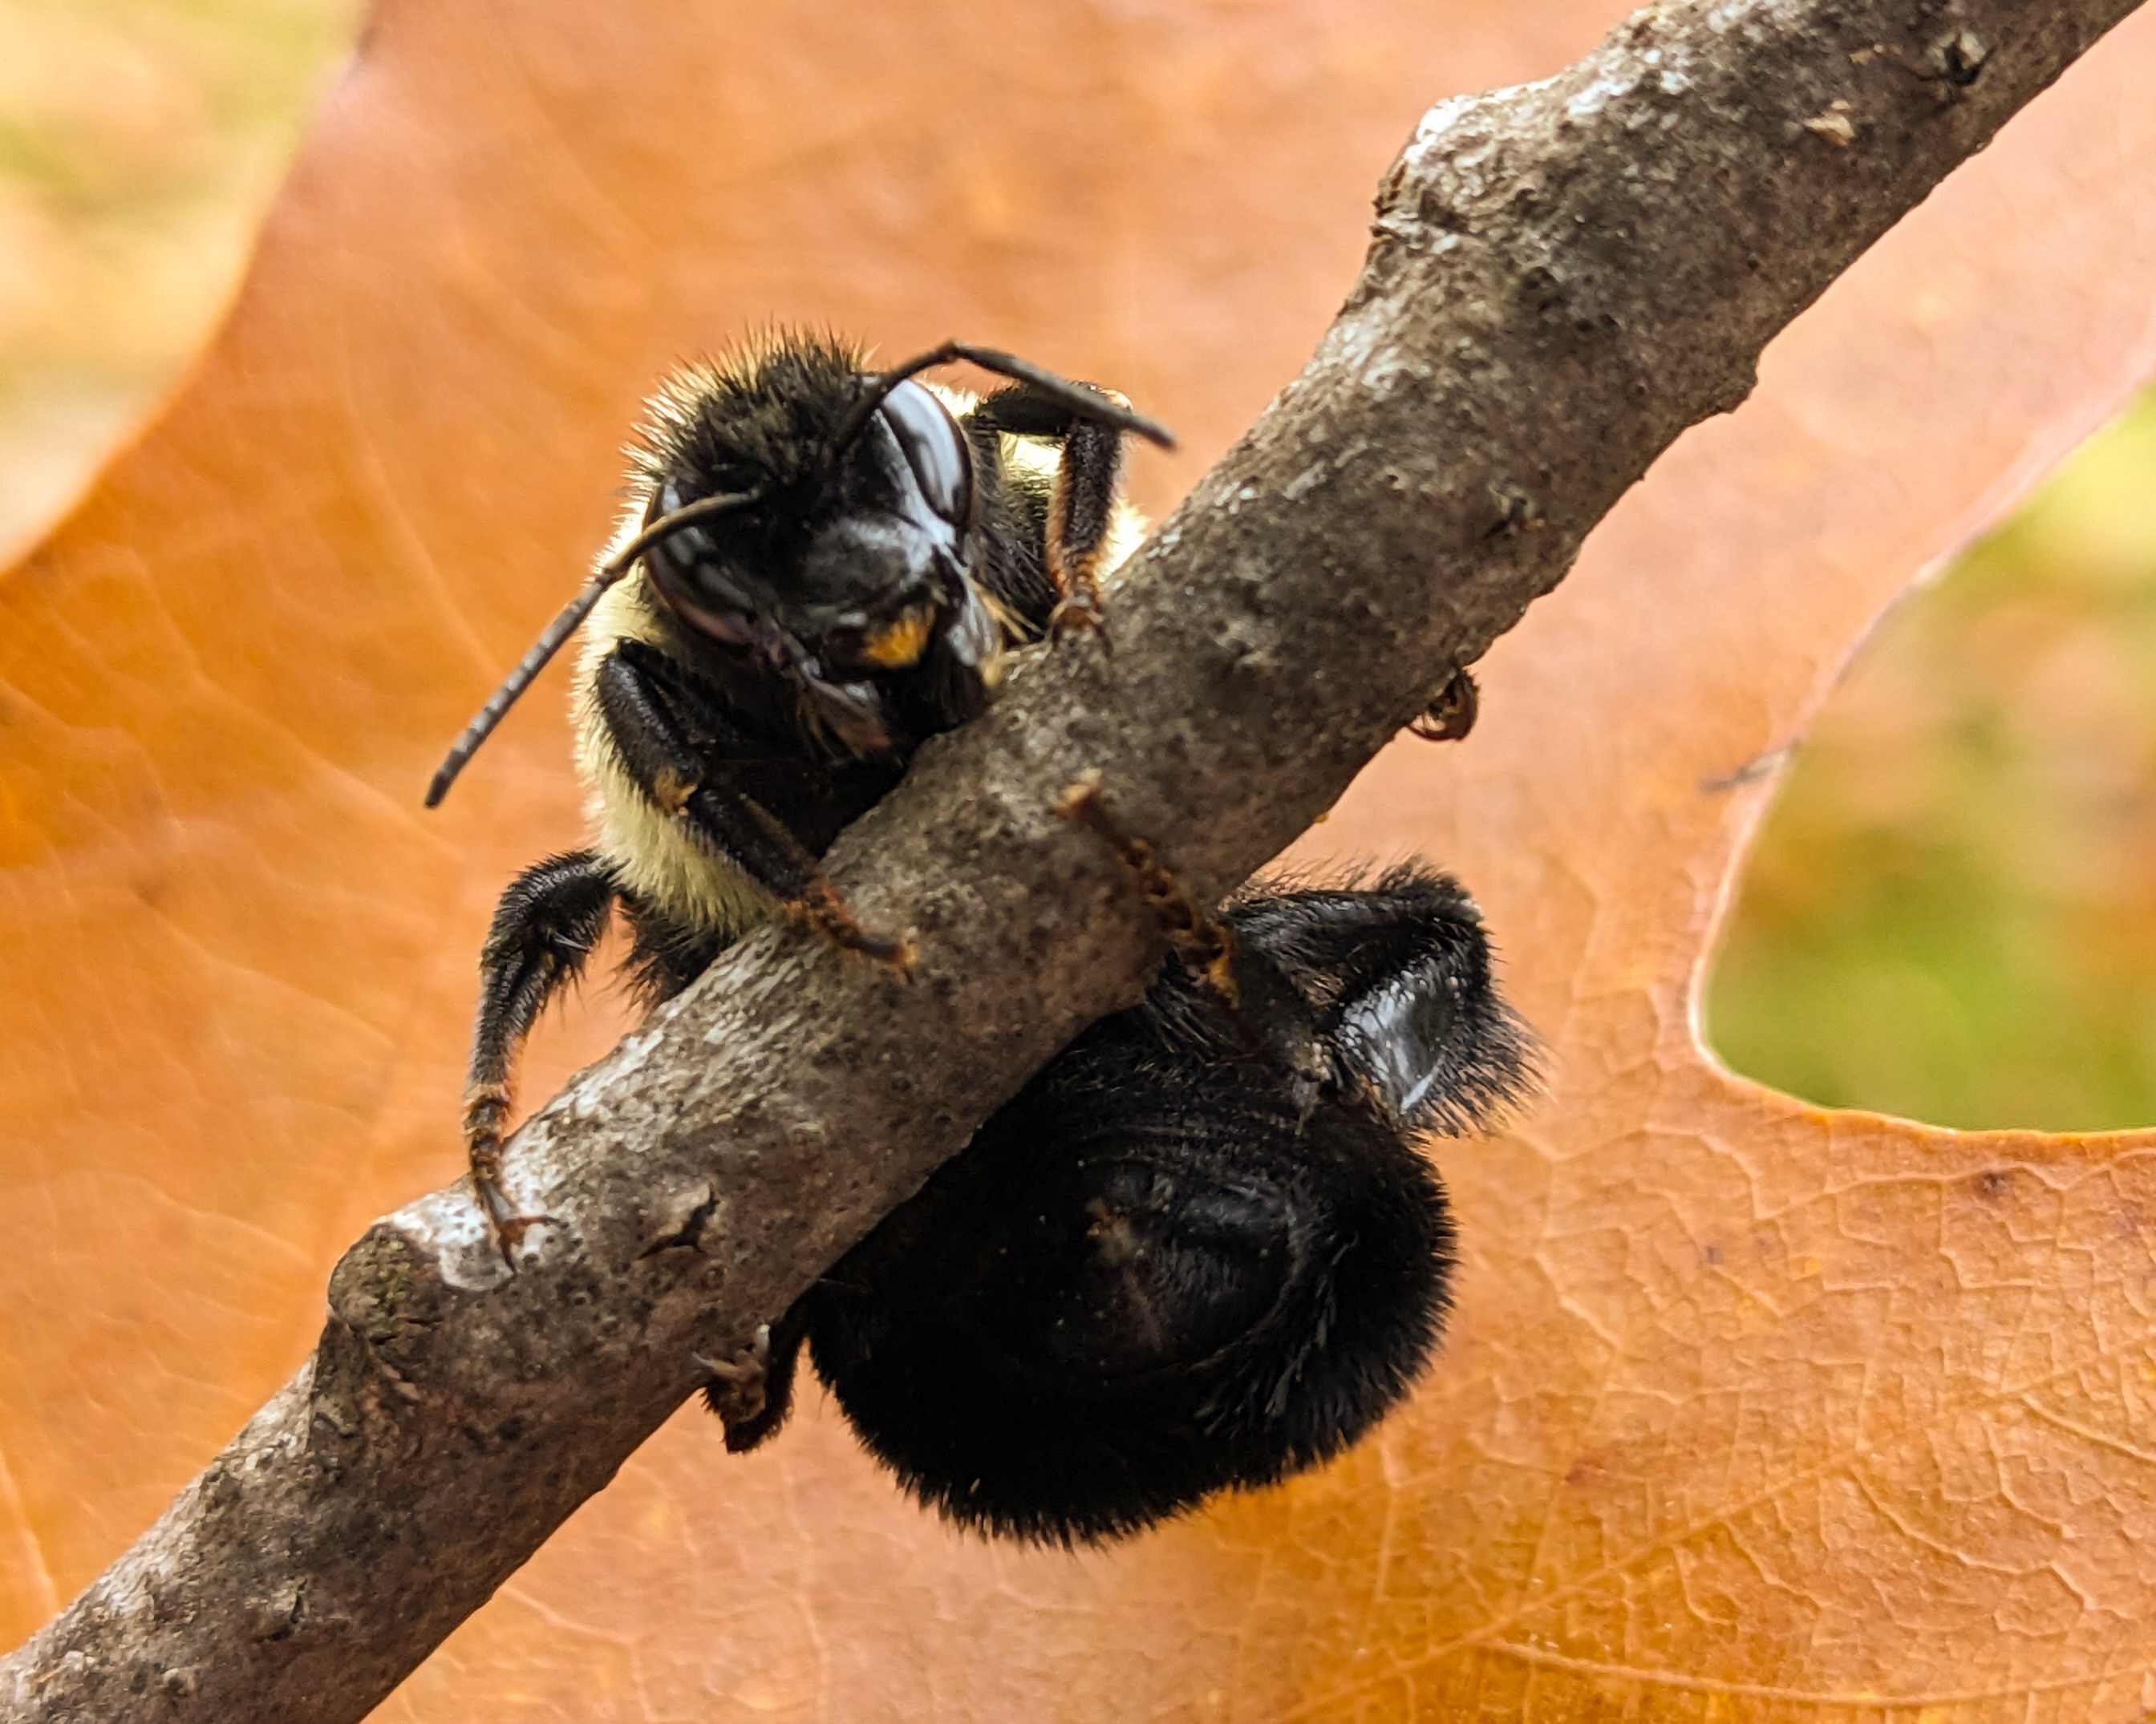 Close-up photo of bee hanging from tree twig/branch with brown leaf behind it